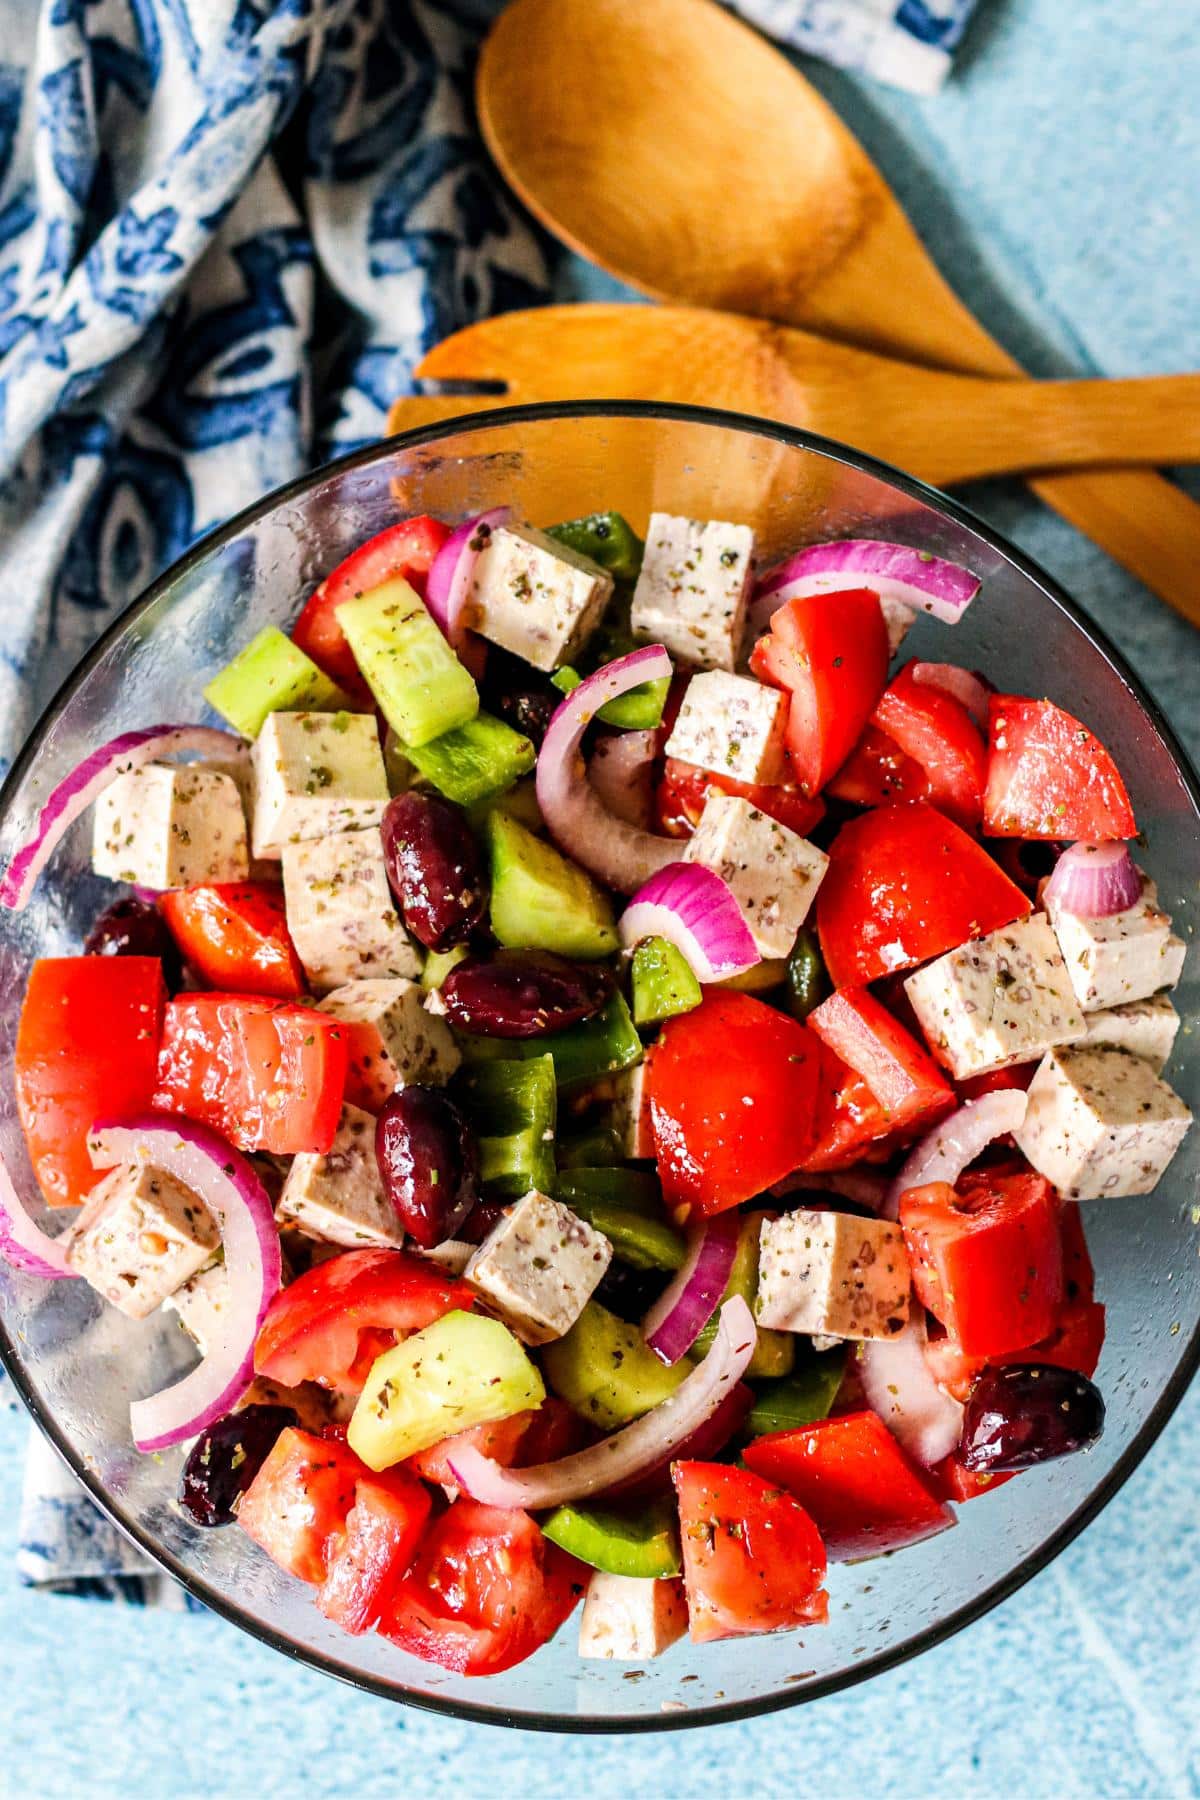 Serving bowl of salad made with tomatoes, cucumbers, red onions, green bell peppers, Kalamata olives, and tofu feta.